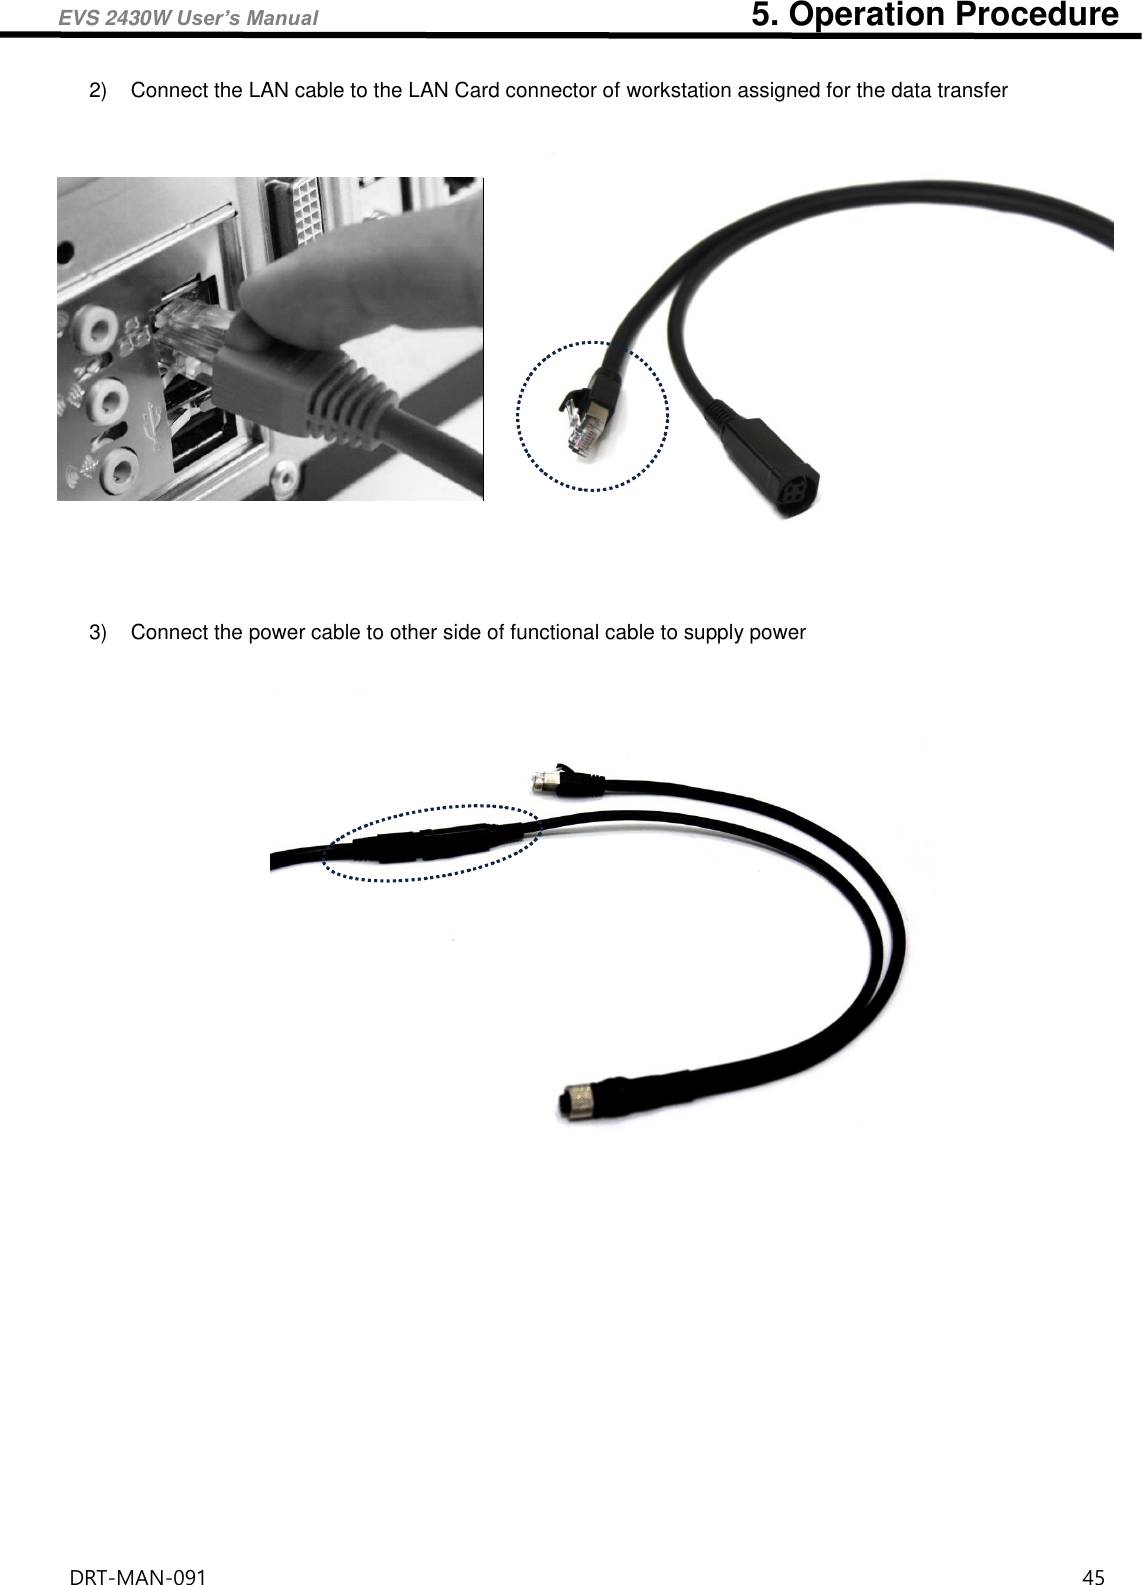 EVS 2430W User’s Manual                                                    5. Operation Procedure DRT-MAN-091                                                                                    45   2)  Connect the LAN cable to the LAN Card connector of workstation assigned for the data transfer           3)  Connect the power cable to other side of functional cable to supply power       